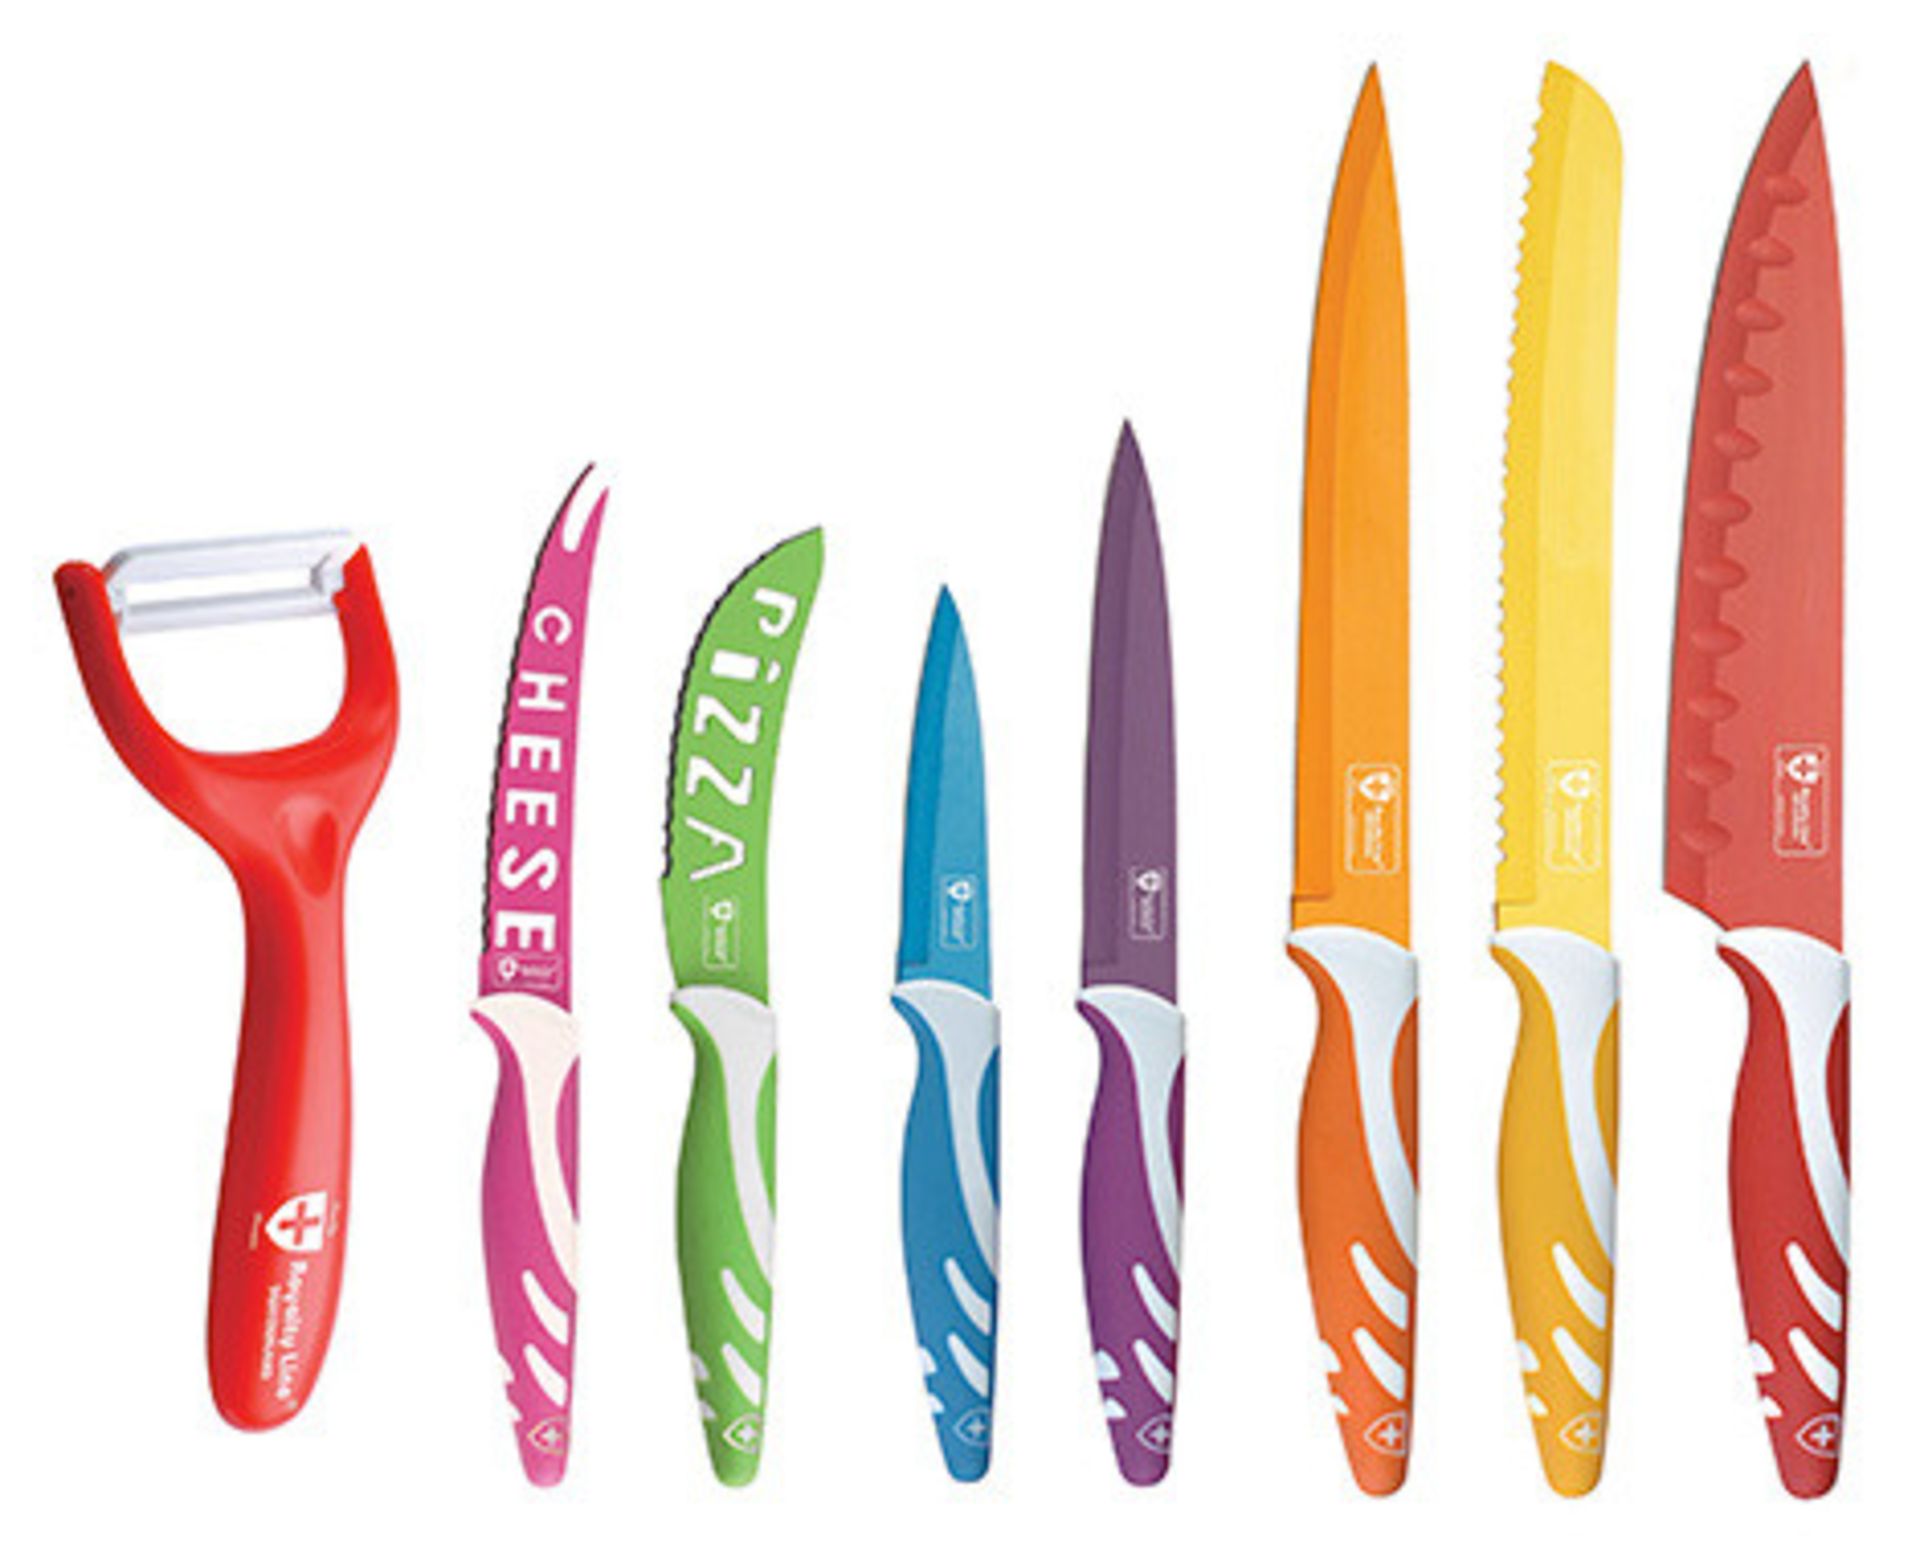 V 7 Piece Non-Stick Multi Coloured Knife Set RRP99.00 Euros (Handle pattern varies from photo) - Image 2 of 2